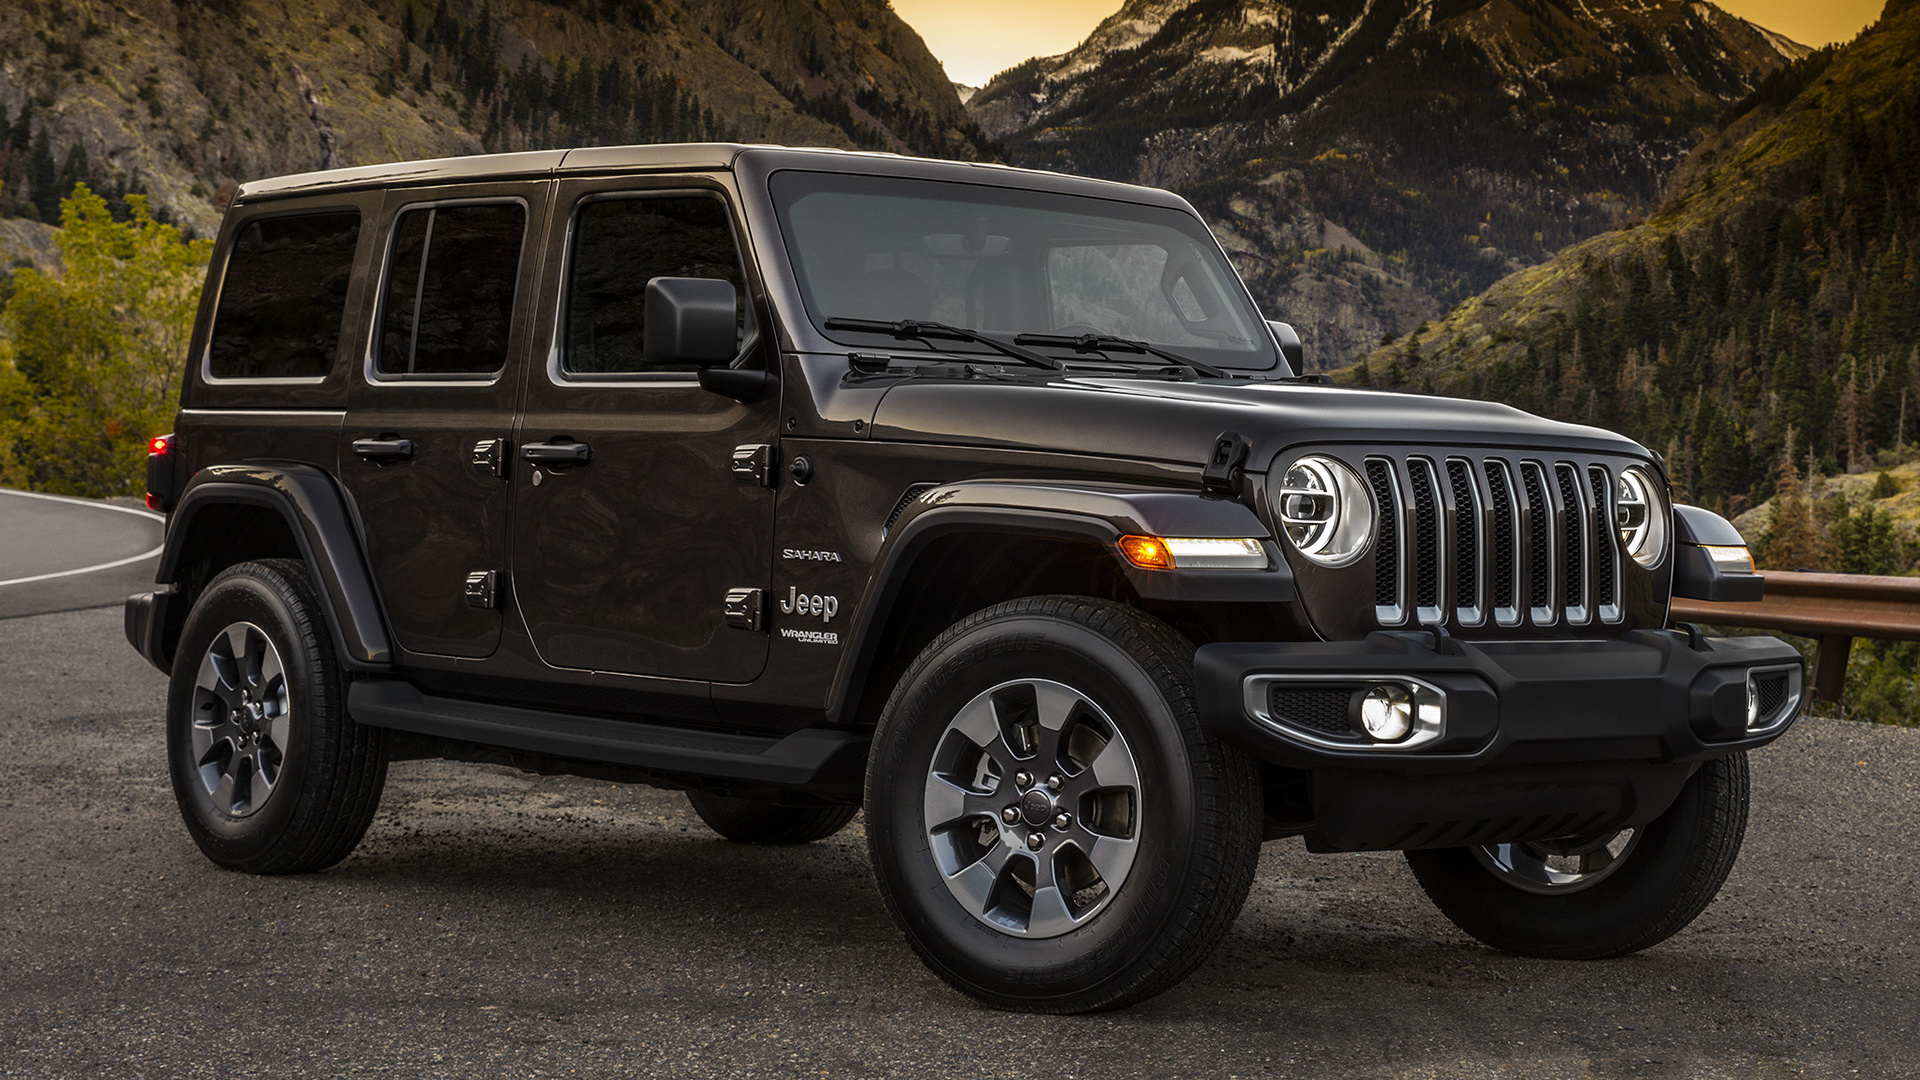 2018 Jeep Wrangler Unlimited Sahara Wallpapers And Hd Images Car